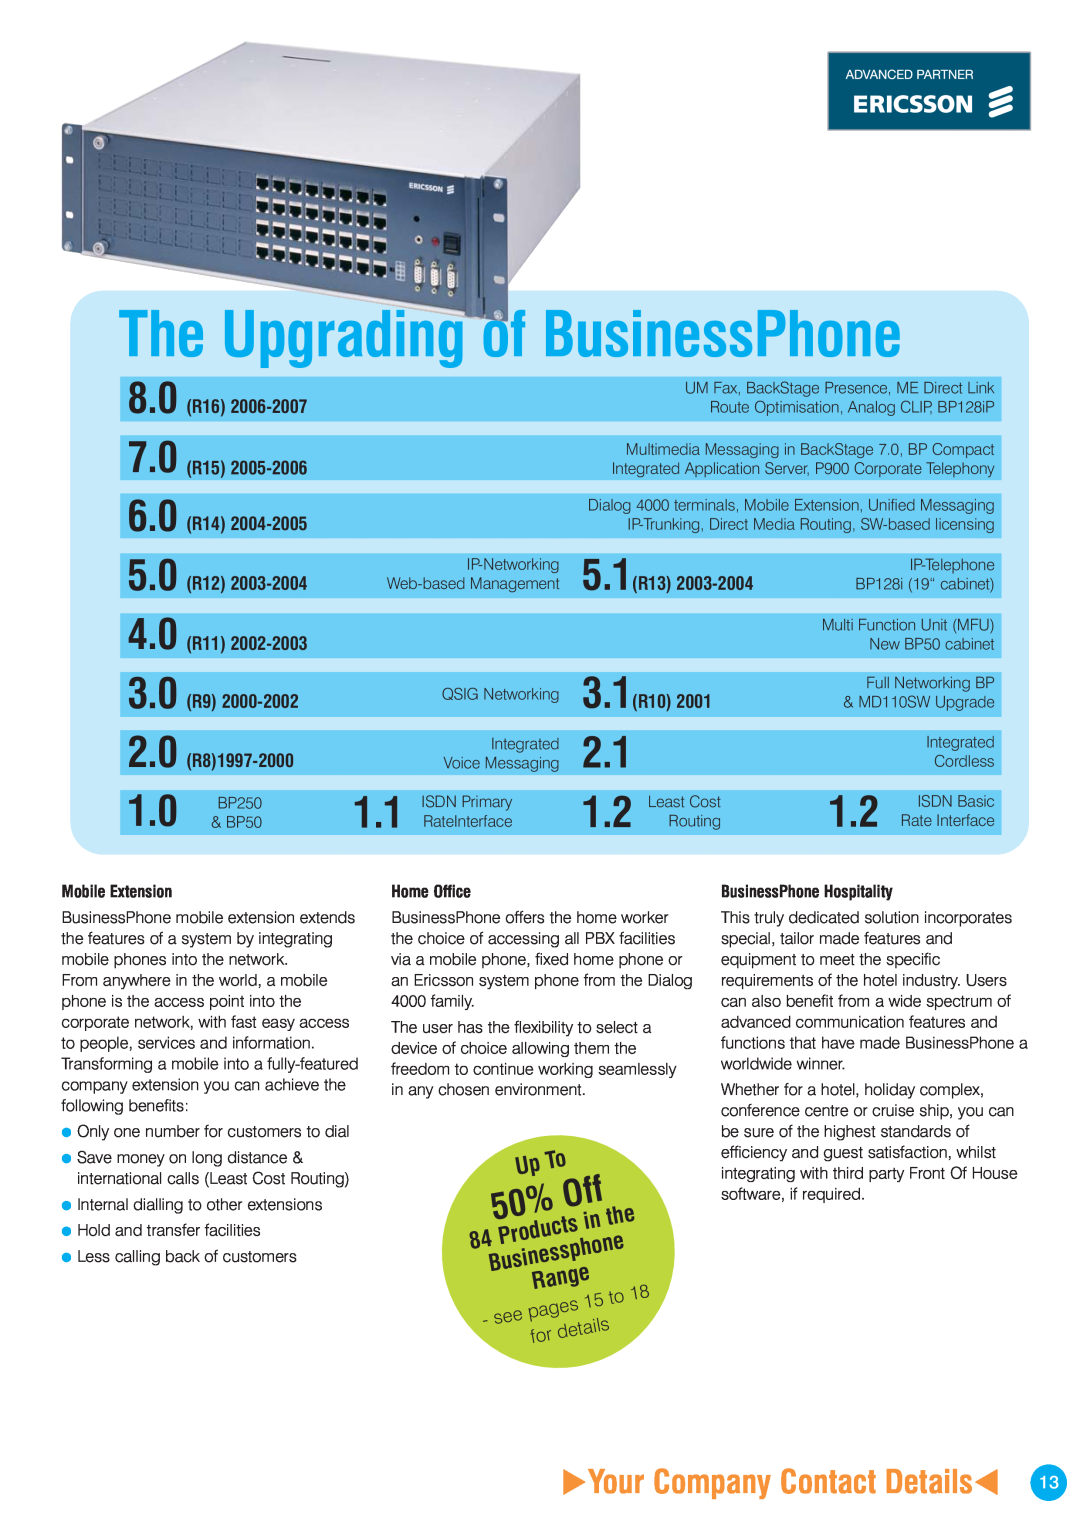 Ericsson ISDN2 The Upgrading of BusinessPhone, Your Company Contact Details, Range, in the, Businessphone, 8.0 R16, 5.1R13 